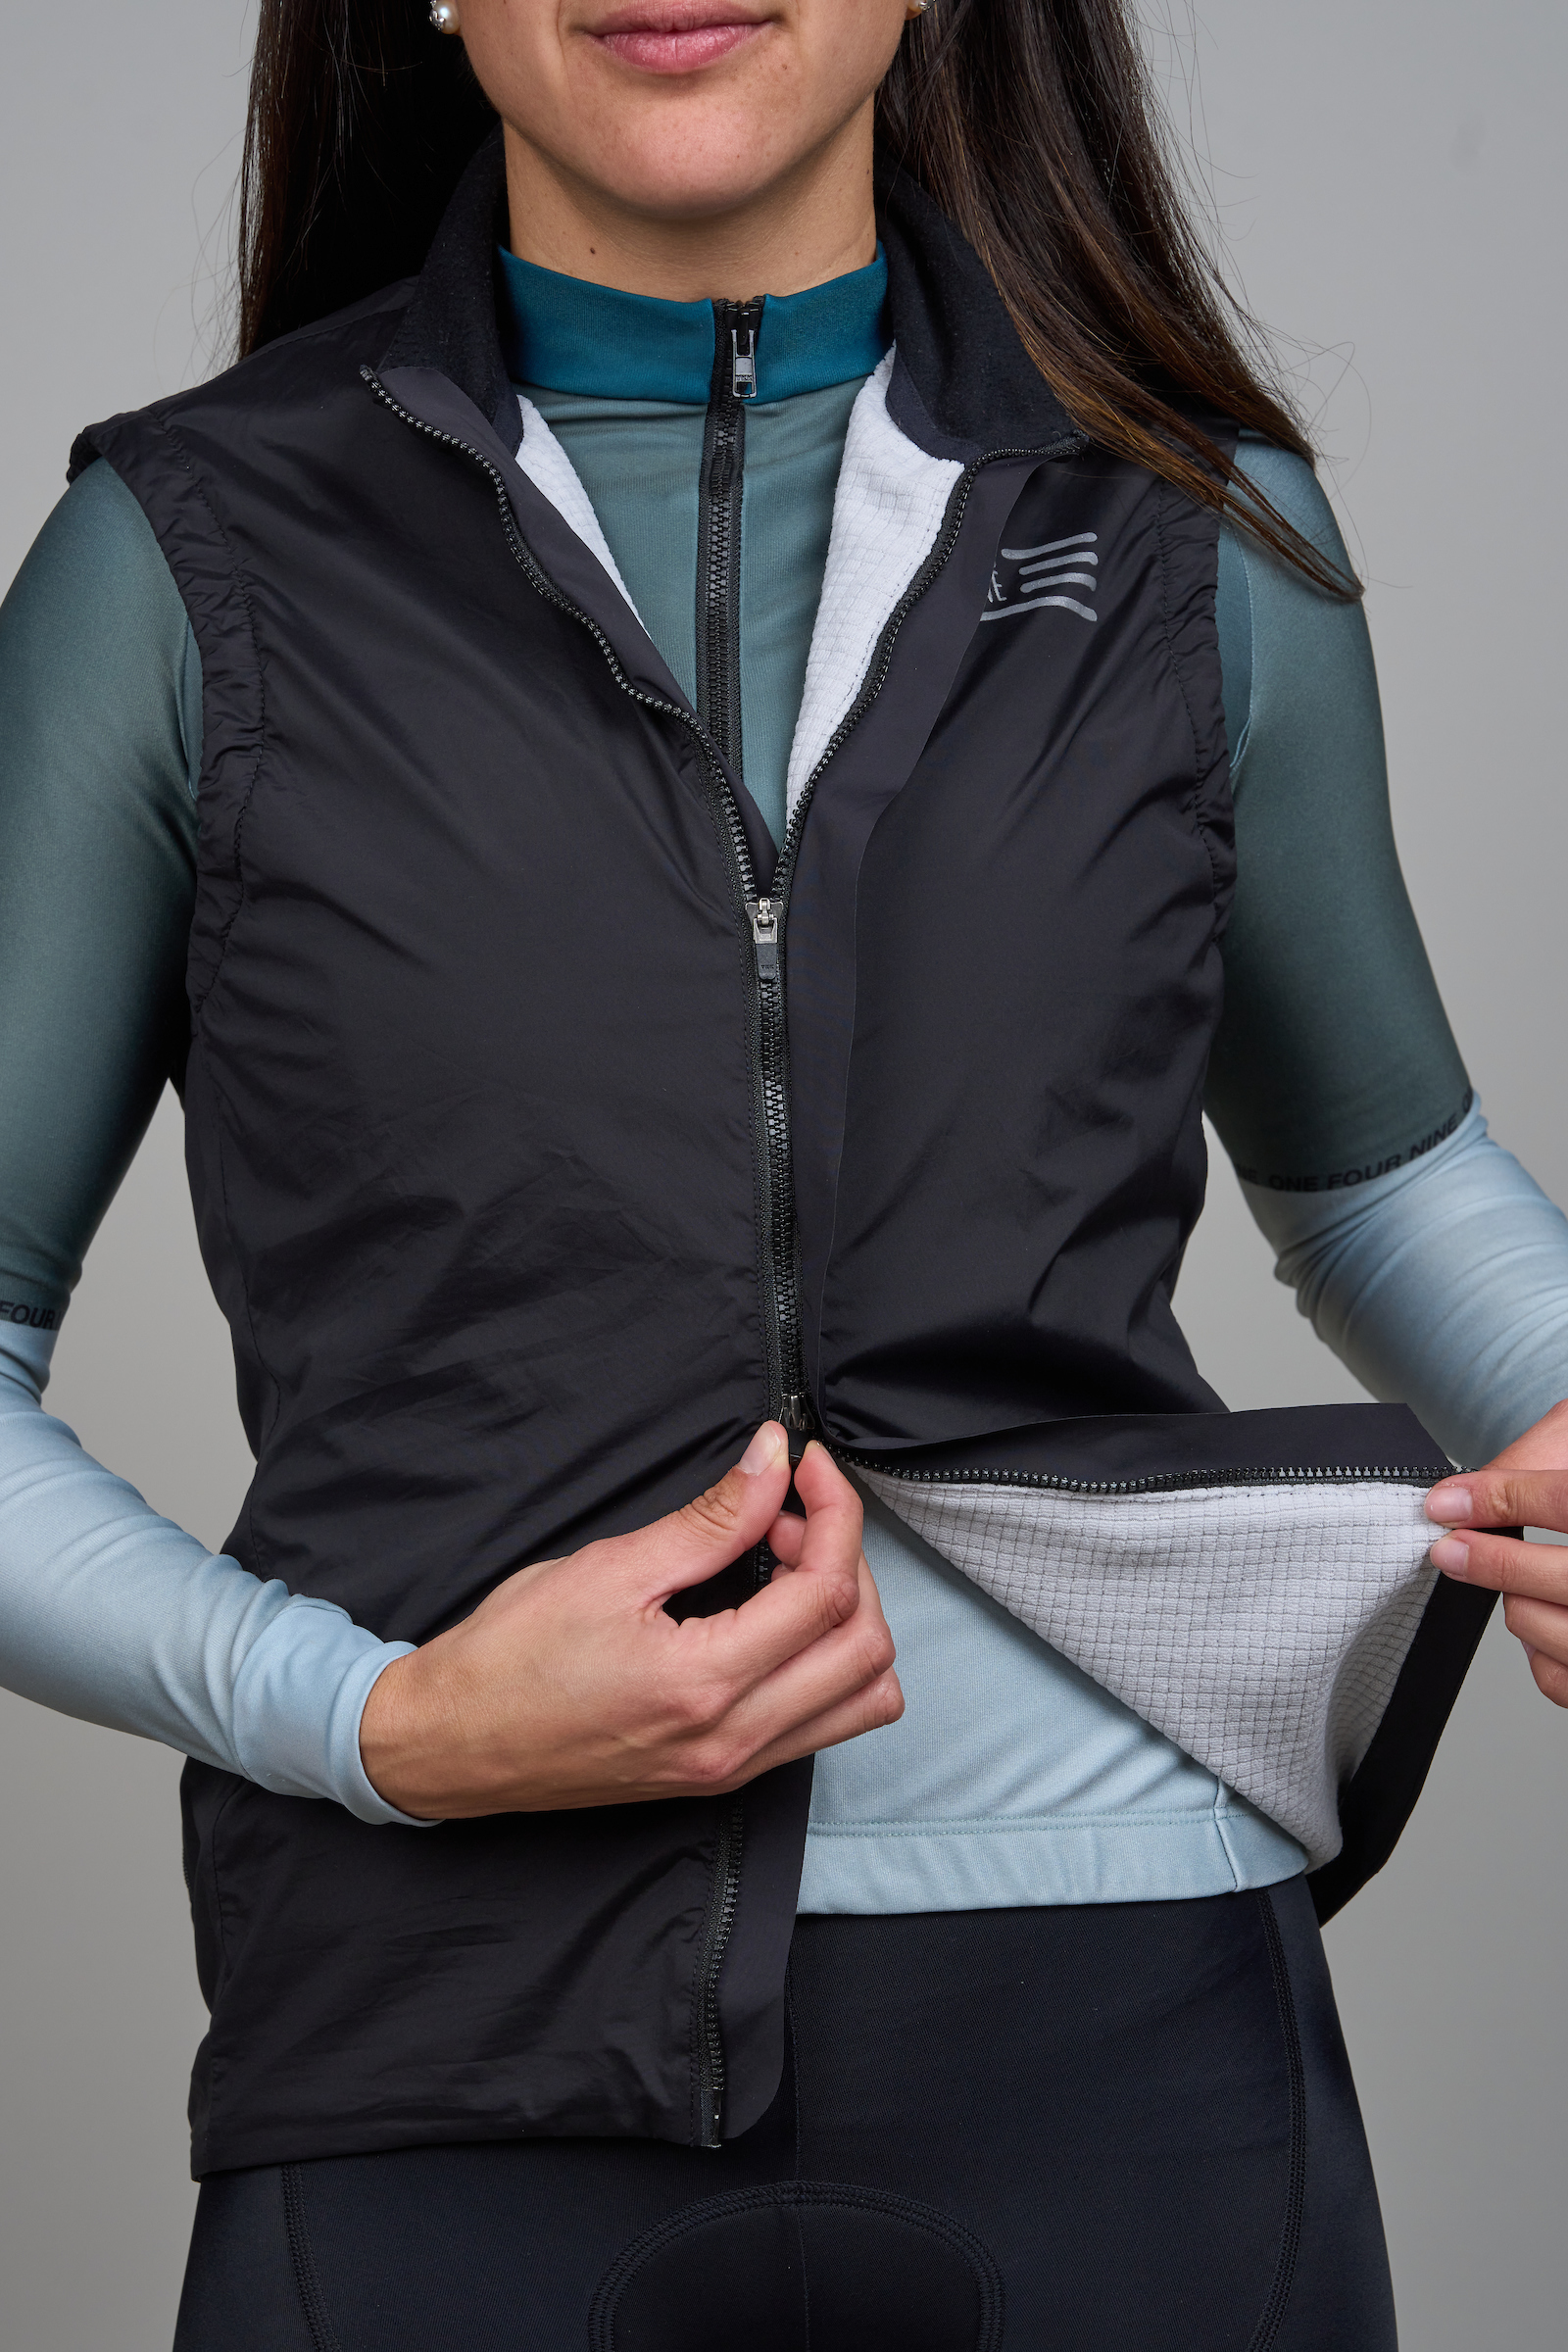 THERMAL VEST WITH 4 POCKETS WOMEN -